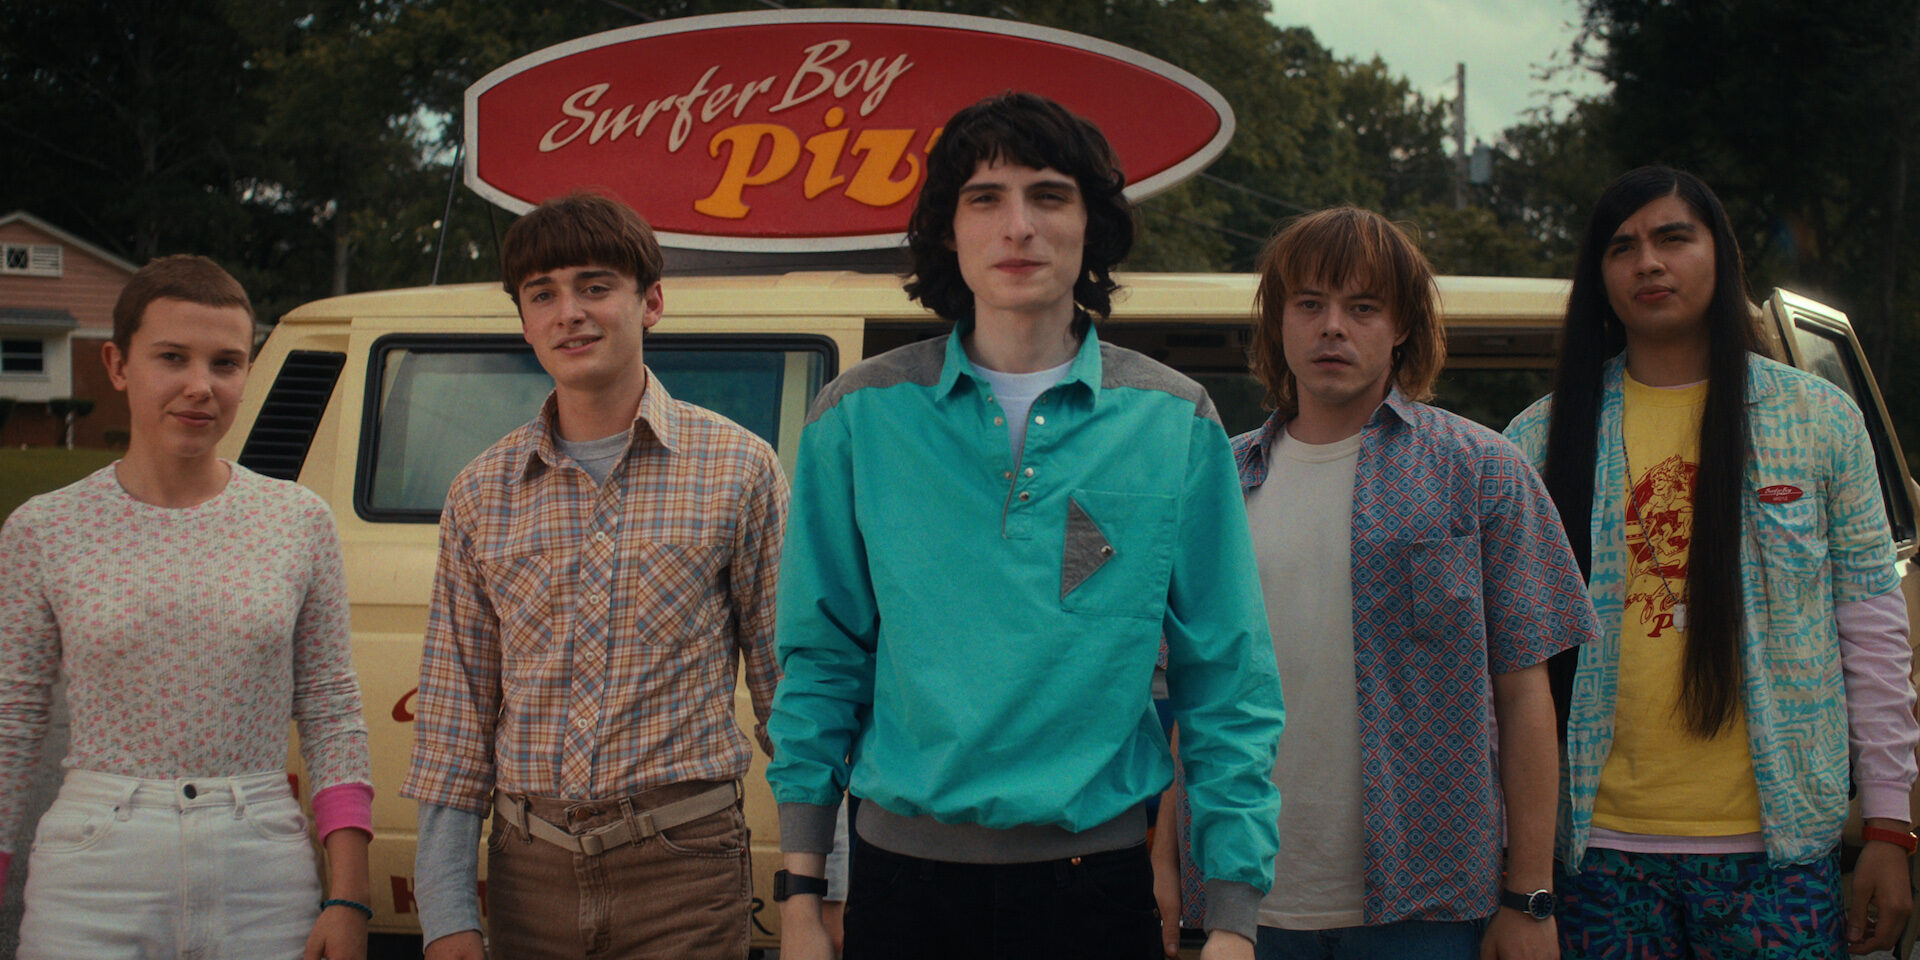 Upcoming 'Stranger Things' Projects in Works at Netflix - What's